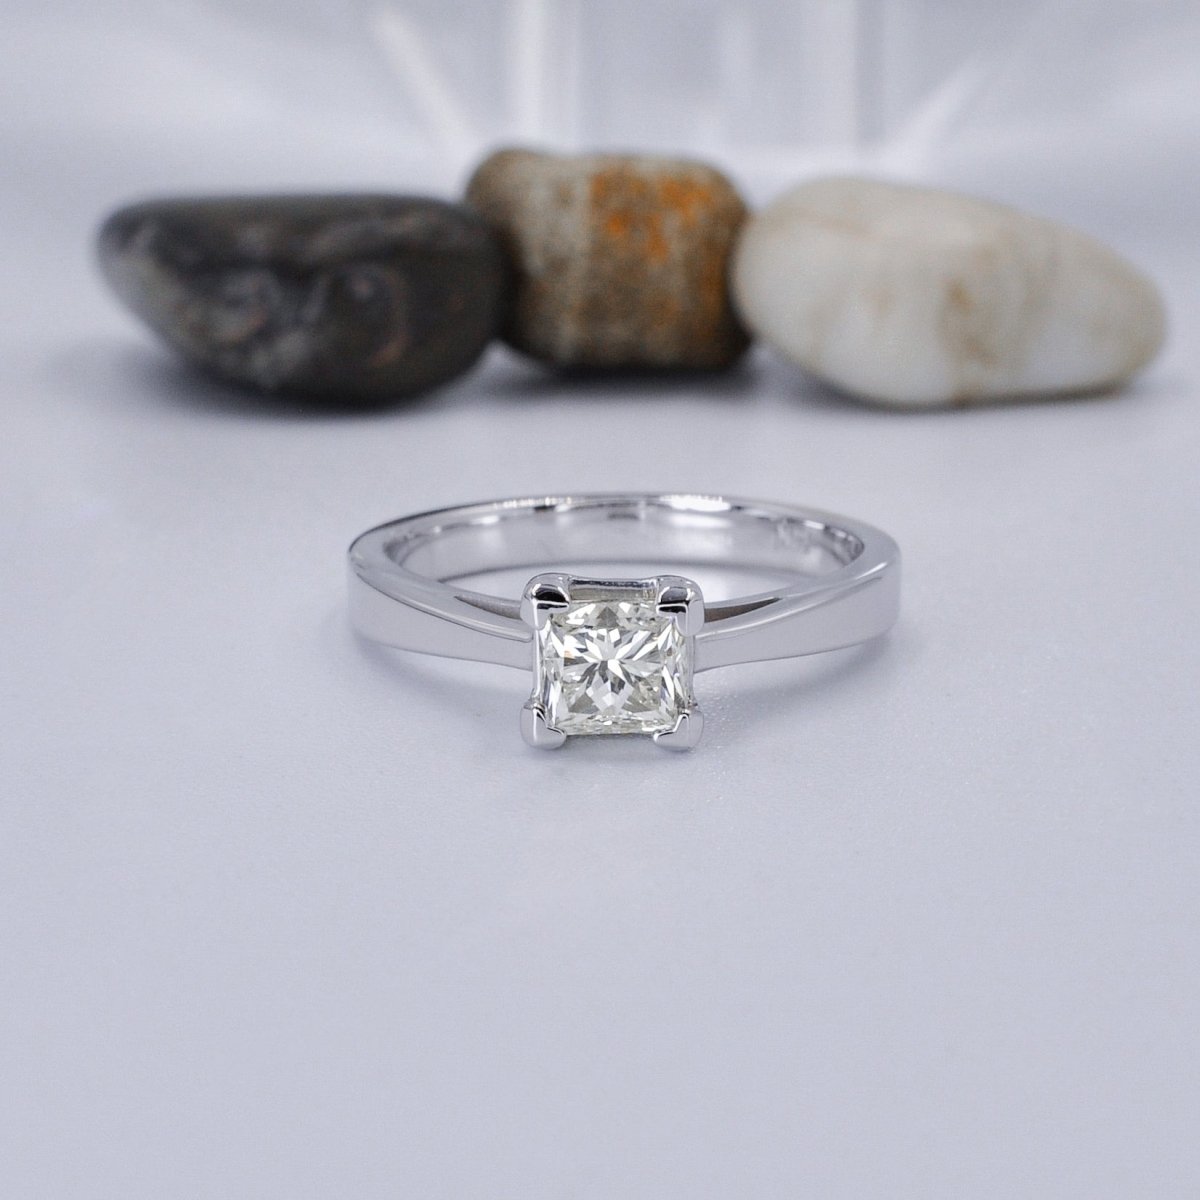 Special 0.80 CT Princess Cut Diamond Solitaire Ring in 14KT White Gold - Primestyle.com